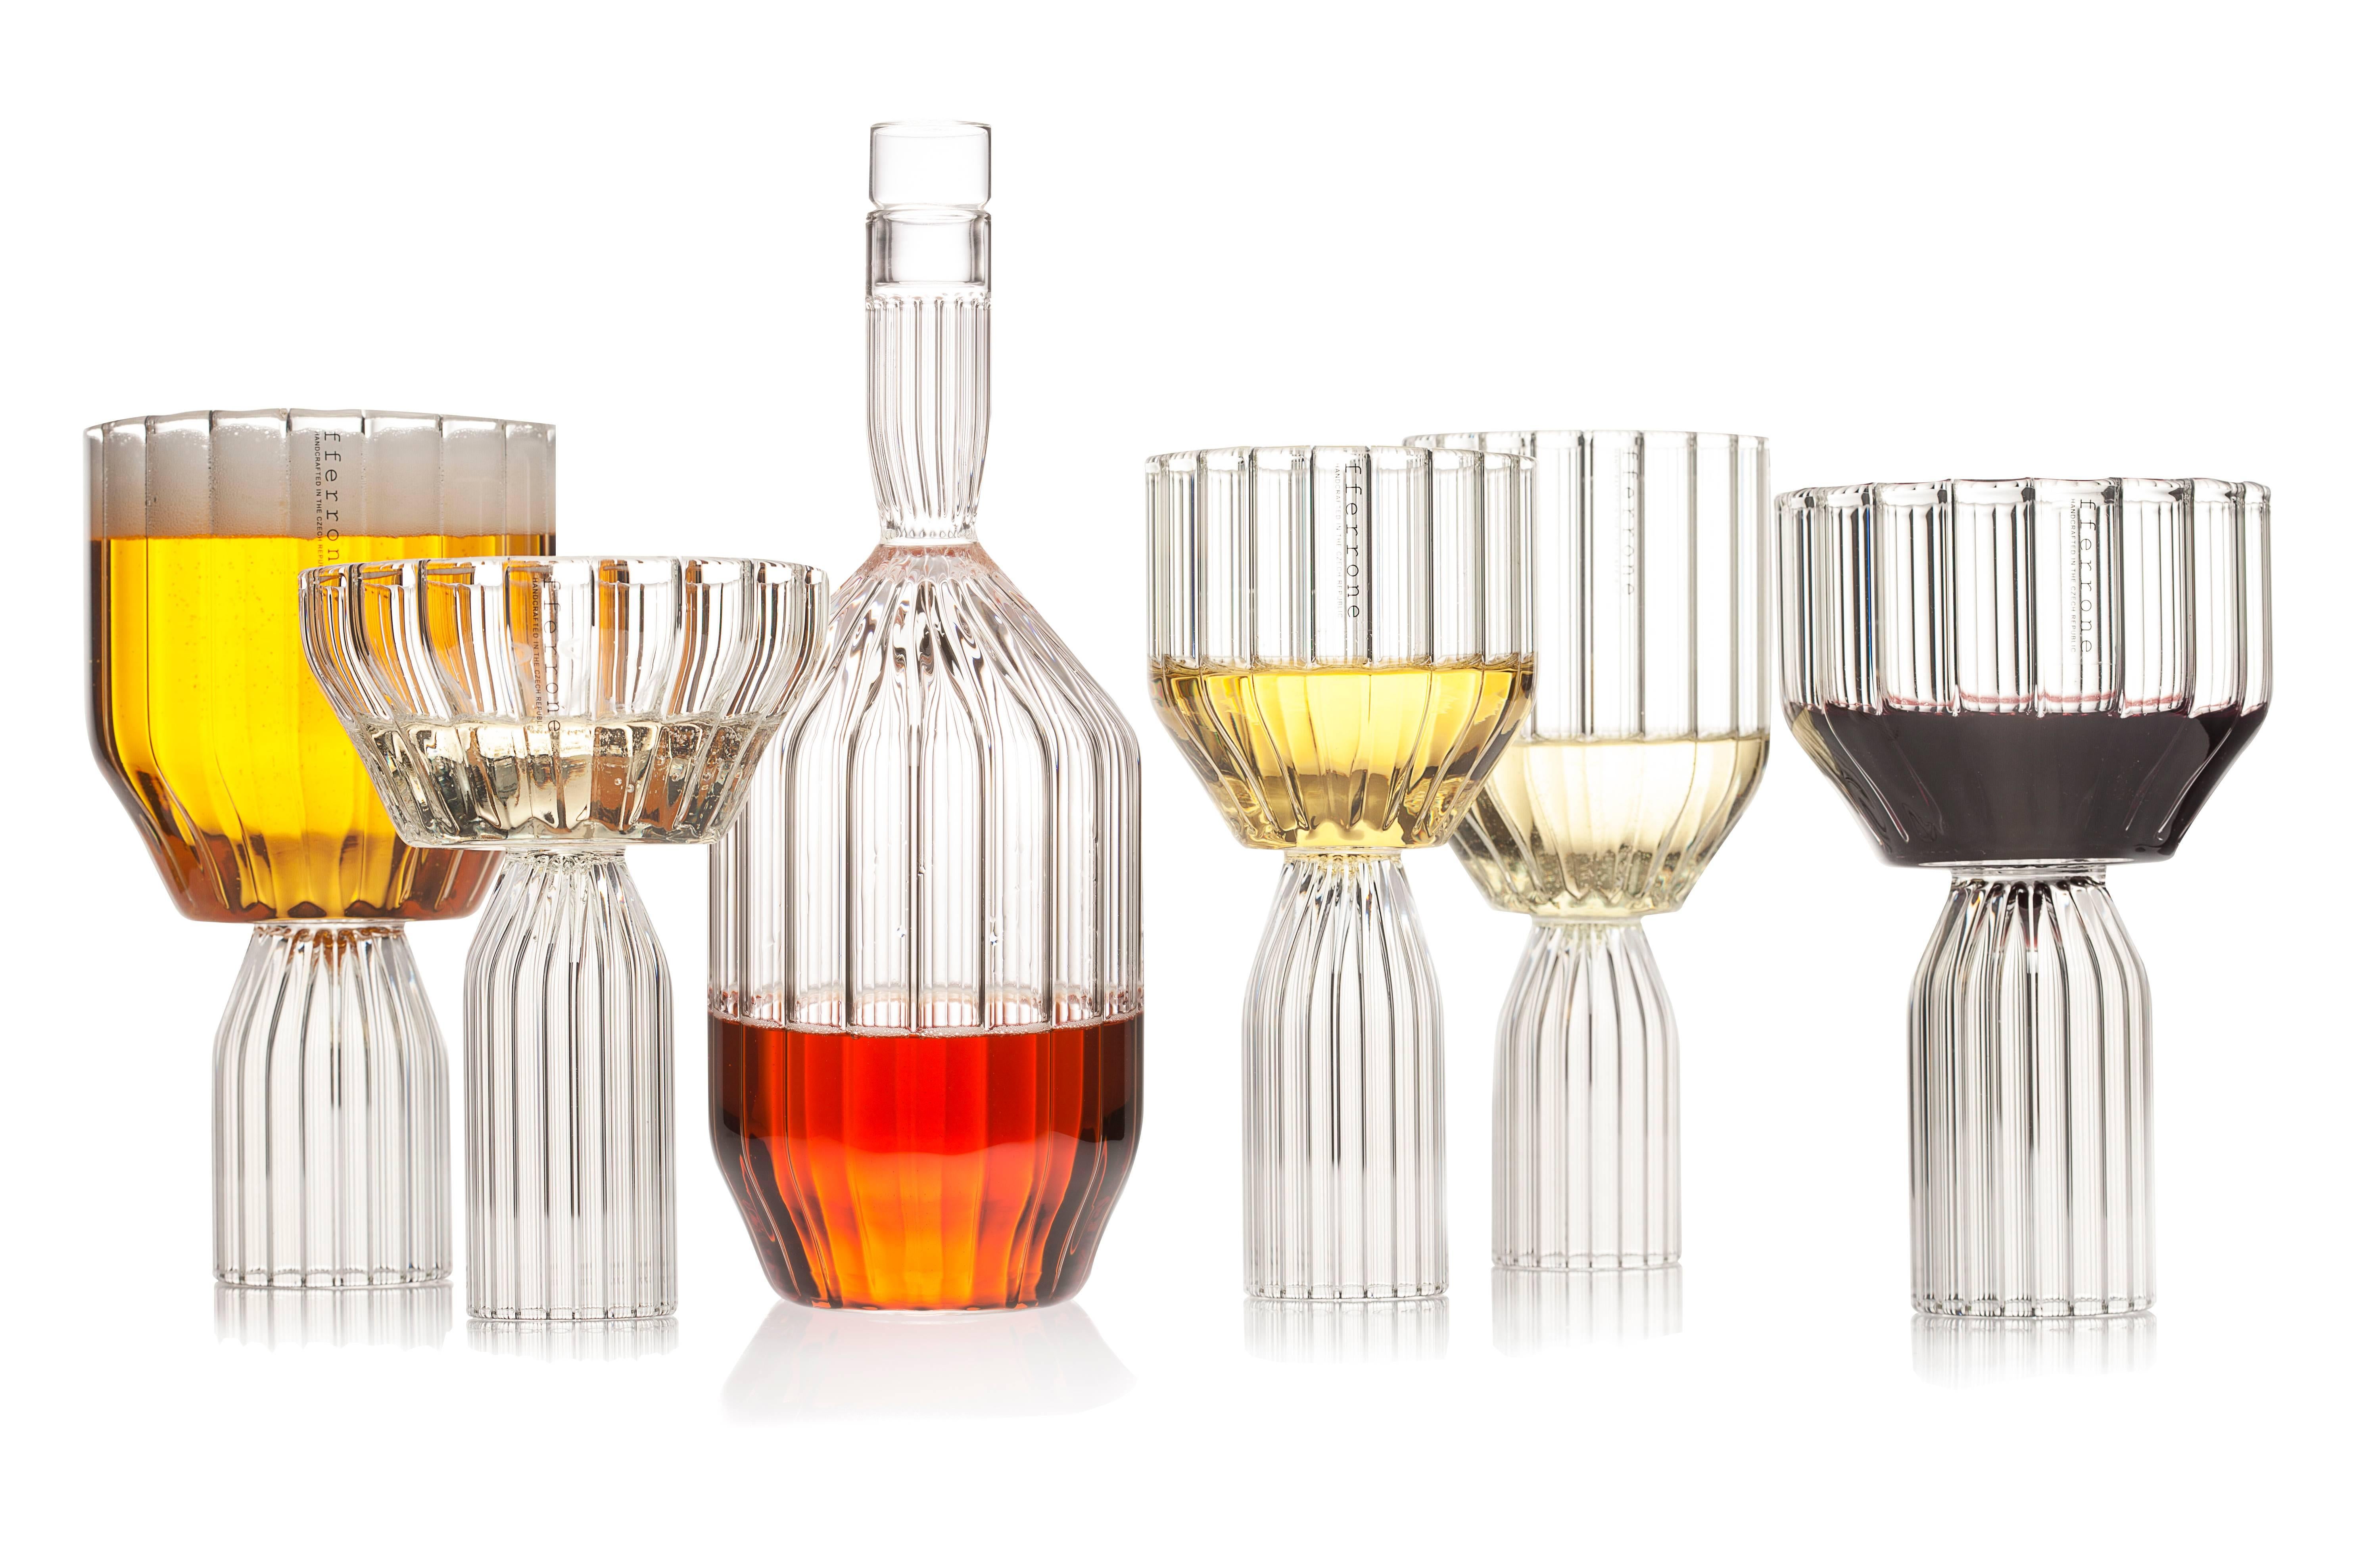 A pair of small Czech contemporary glass handcrafted is the perfect large goblet wine or cocktail glass for drinks. Excellent for any drink or dessert wine.

The modern take on cut glass, the Margot Collection inverts tradition with intricate